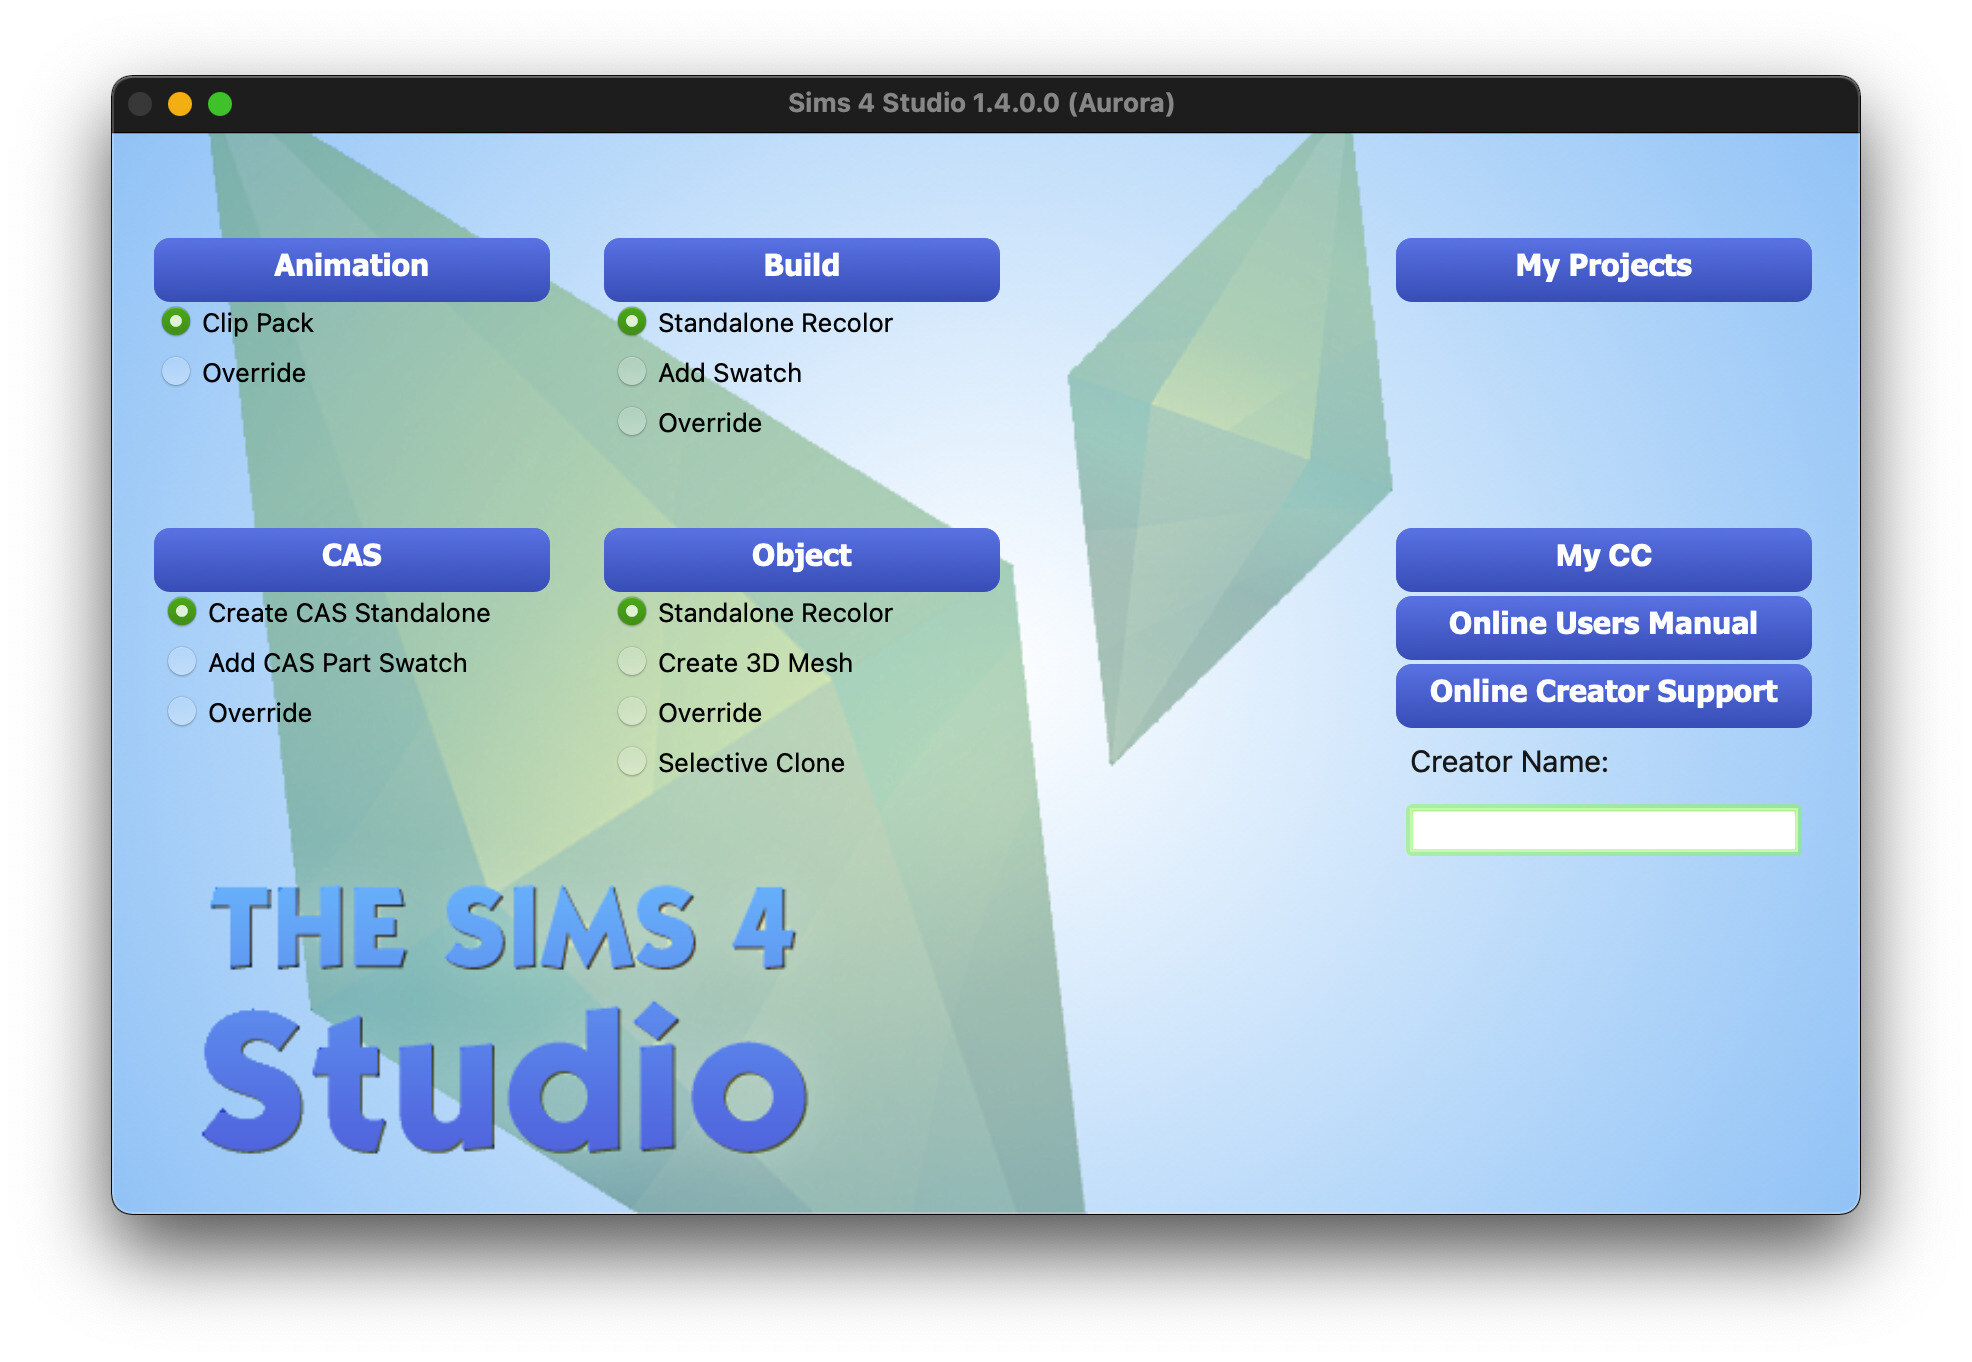 How To Download Sims 4 Studio On Mac